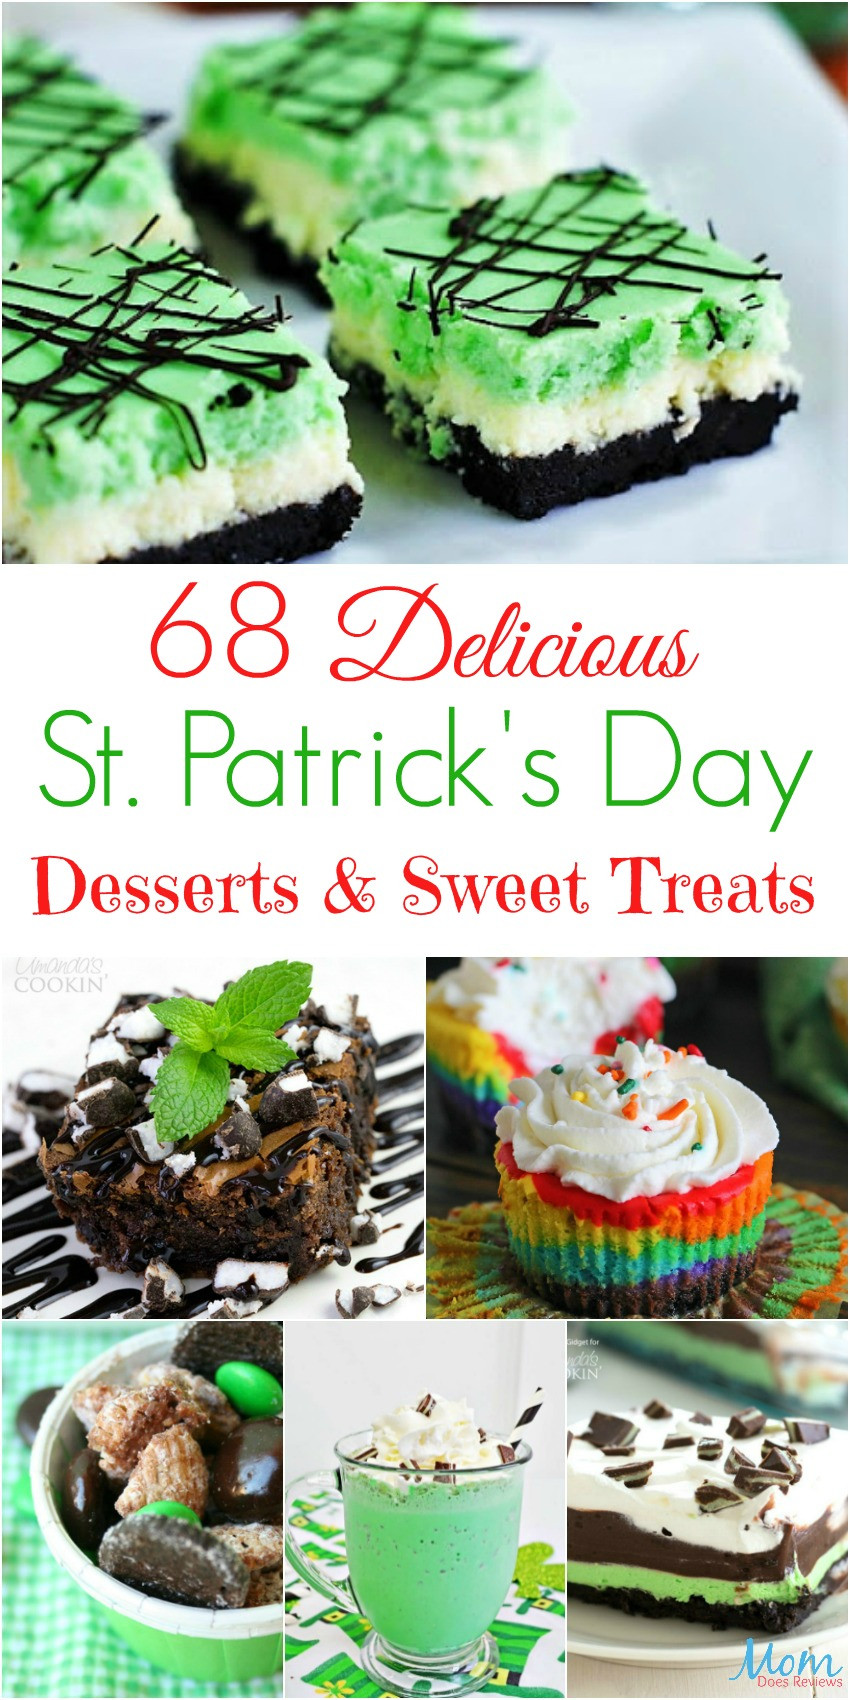 St. Patrick'S Day Desserts
 68 Delicious St Patrick s Day Desserts & Sweet Treats